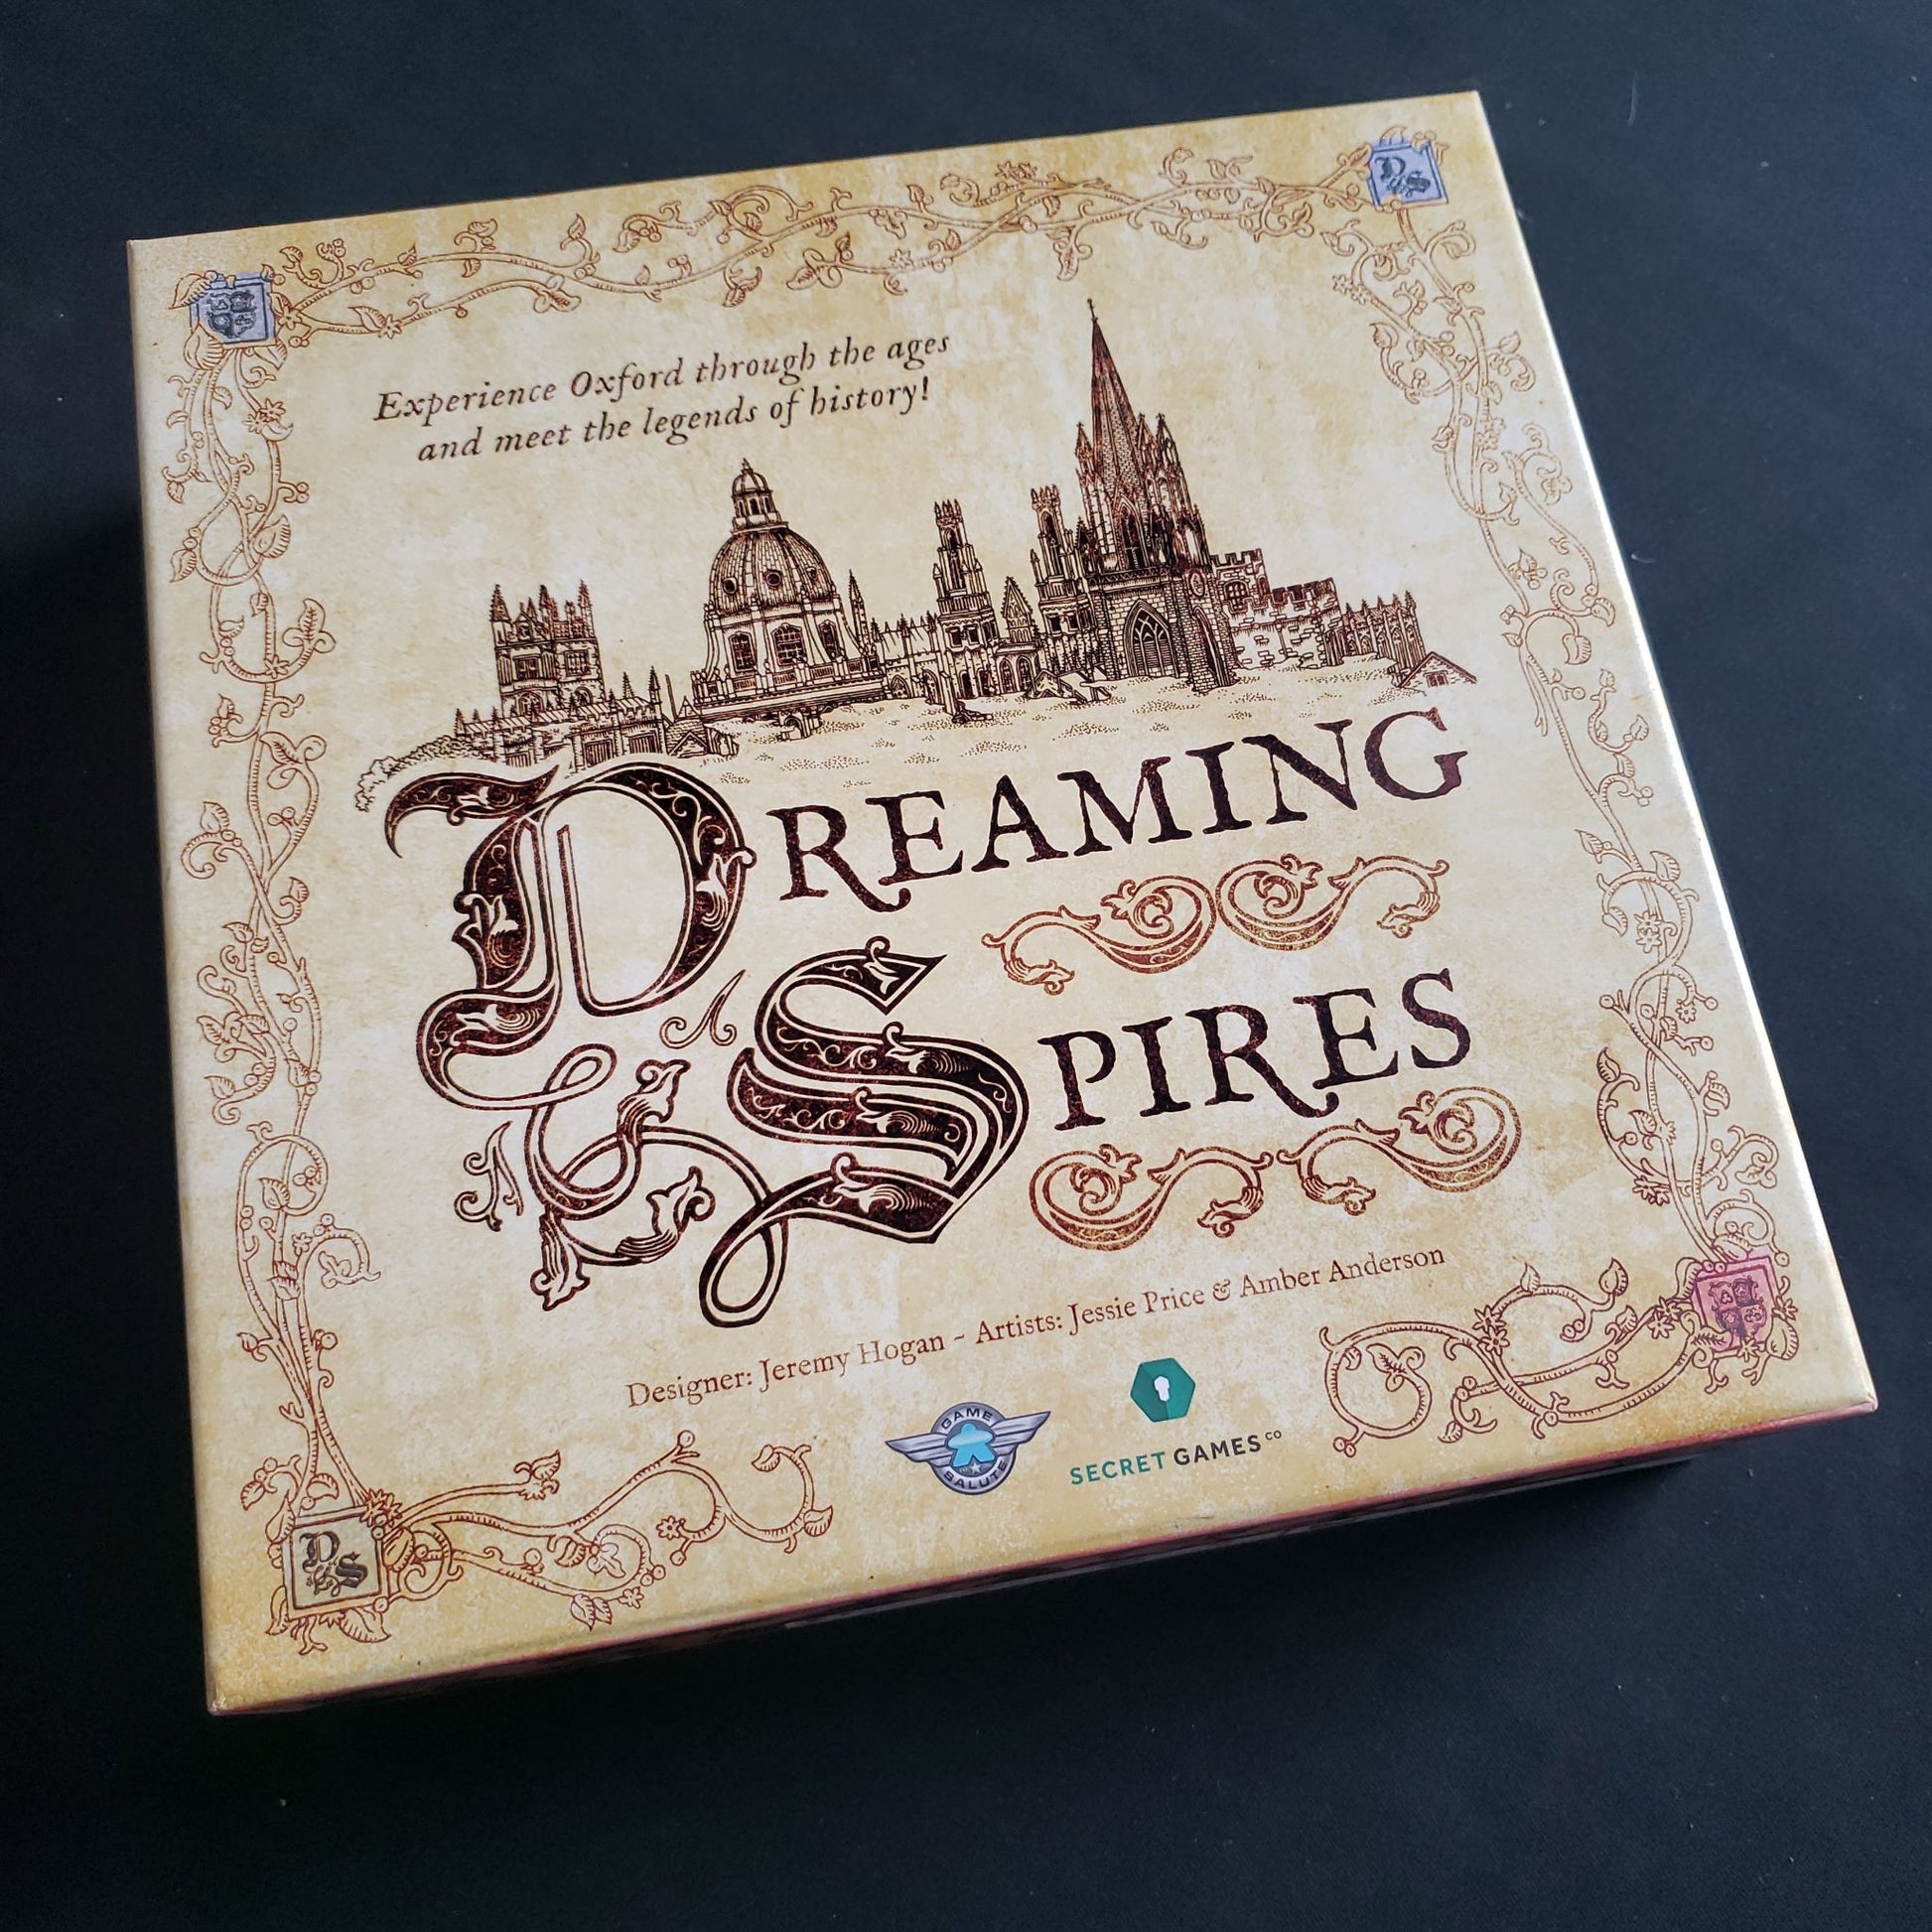 Image shows the front cover of the box of the Dreaming Spires board game